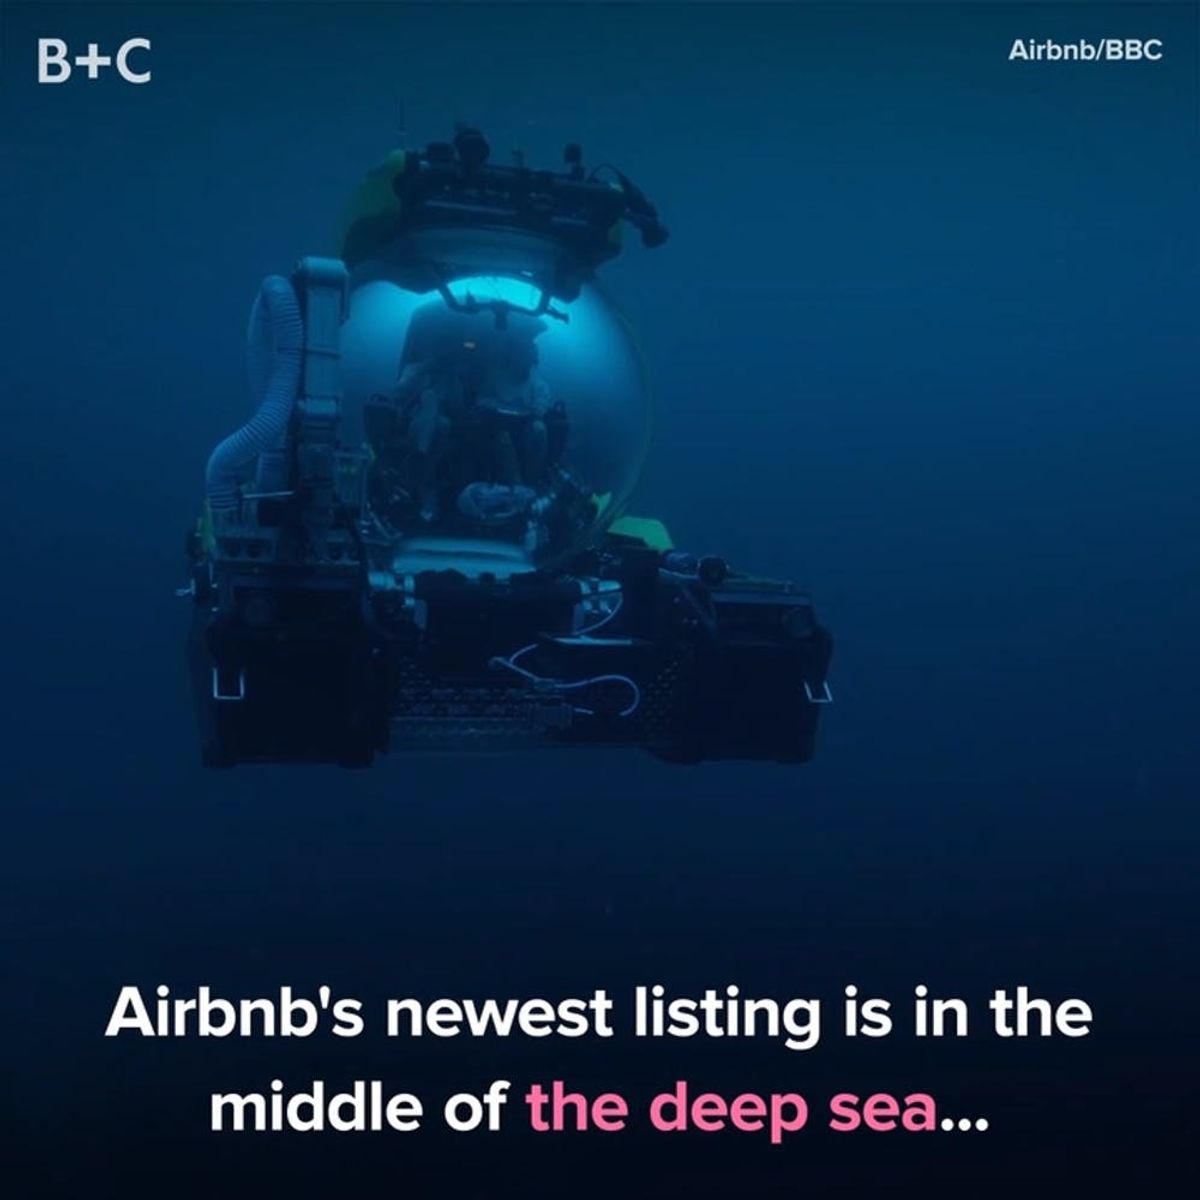 Airbnb’s New Listing Is in the Middle of the Sea